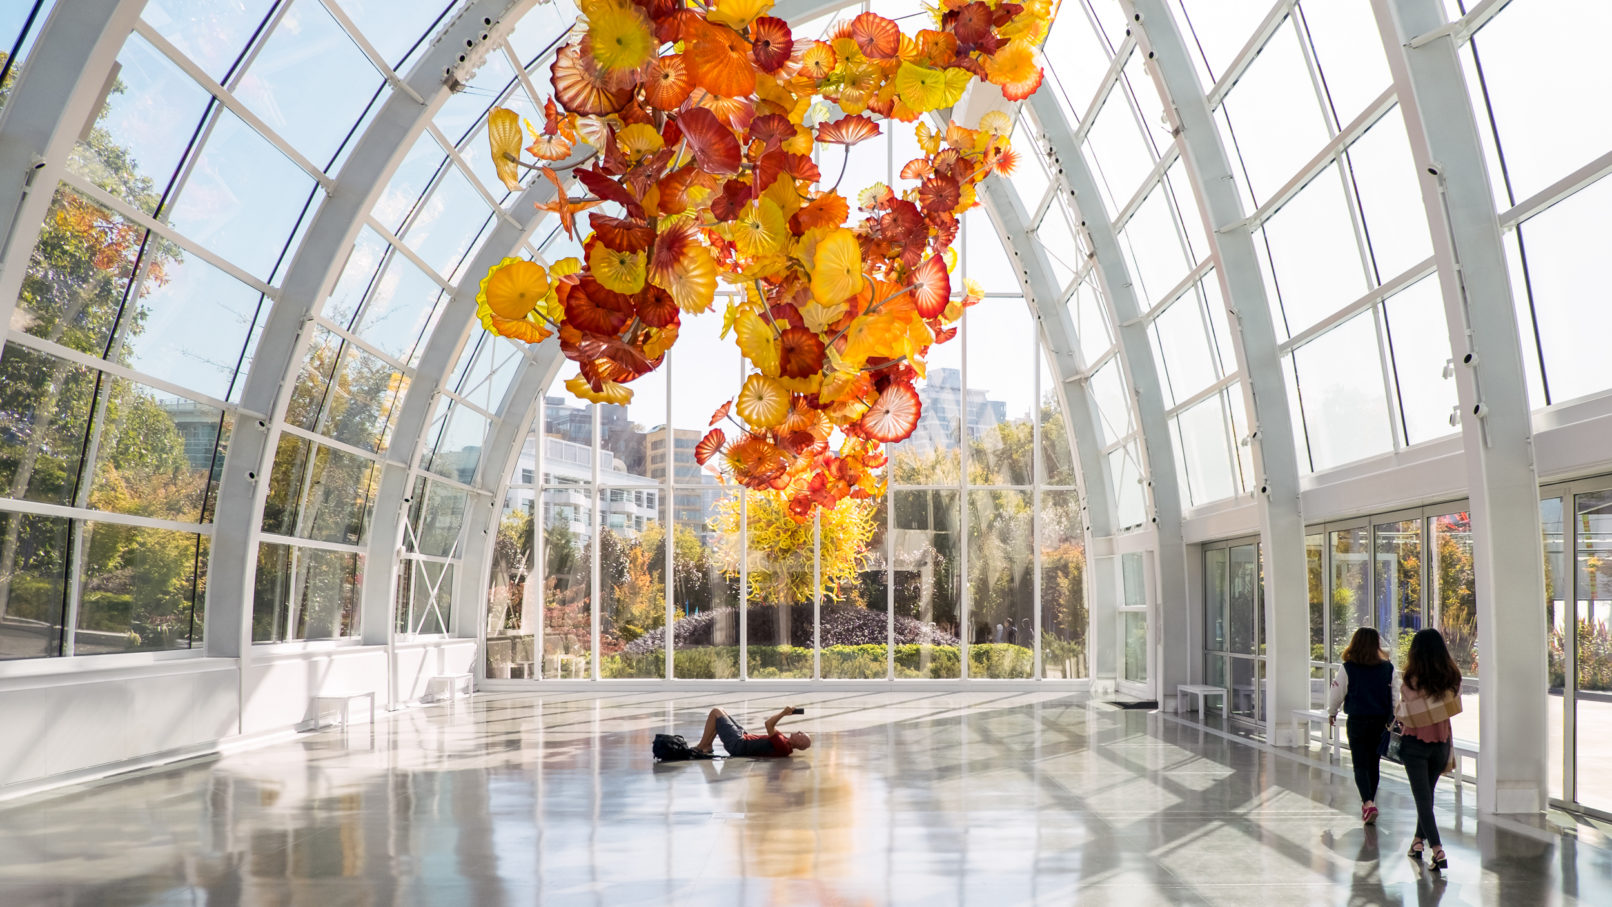 Chihuly Garden and Glass Museum Greenhouse Interior Architectural Photography Owen Richards Architects